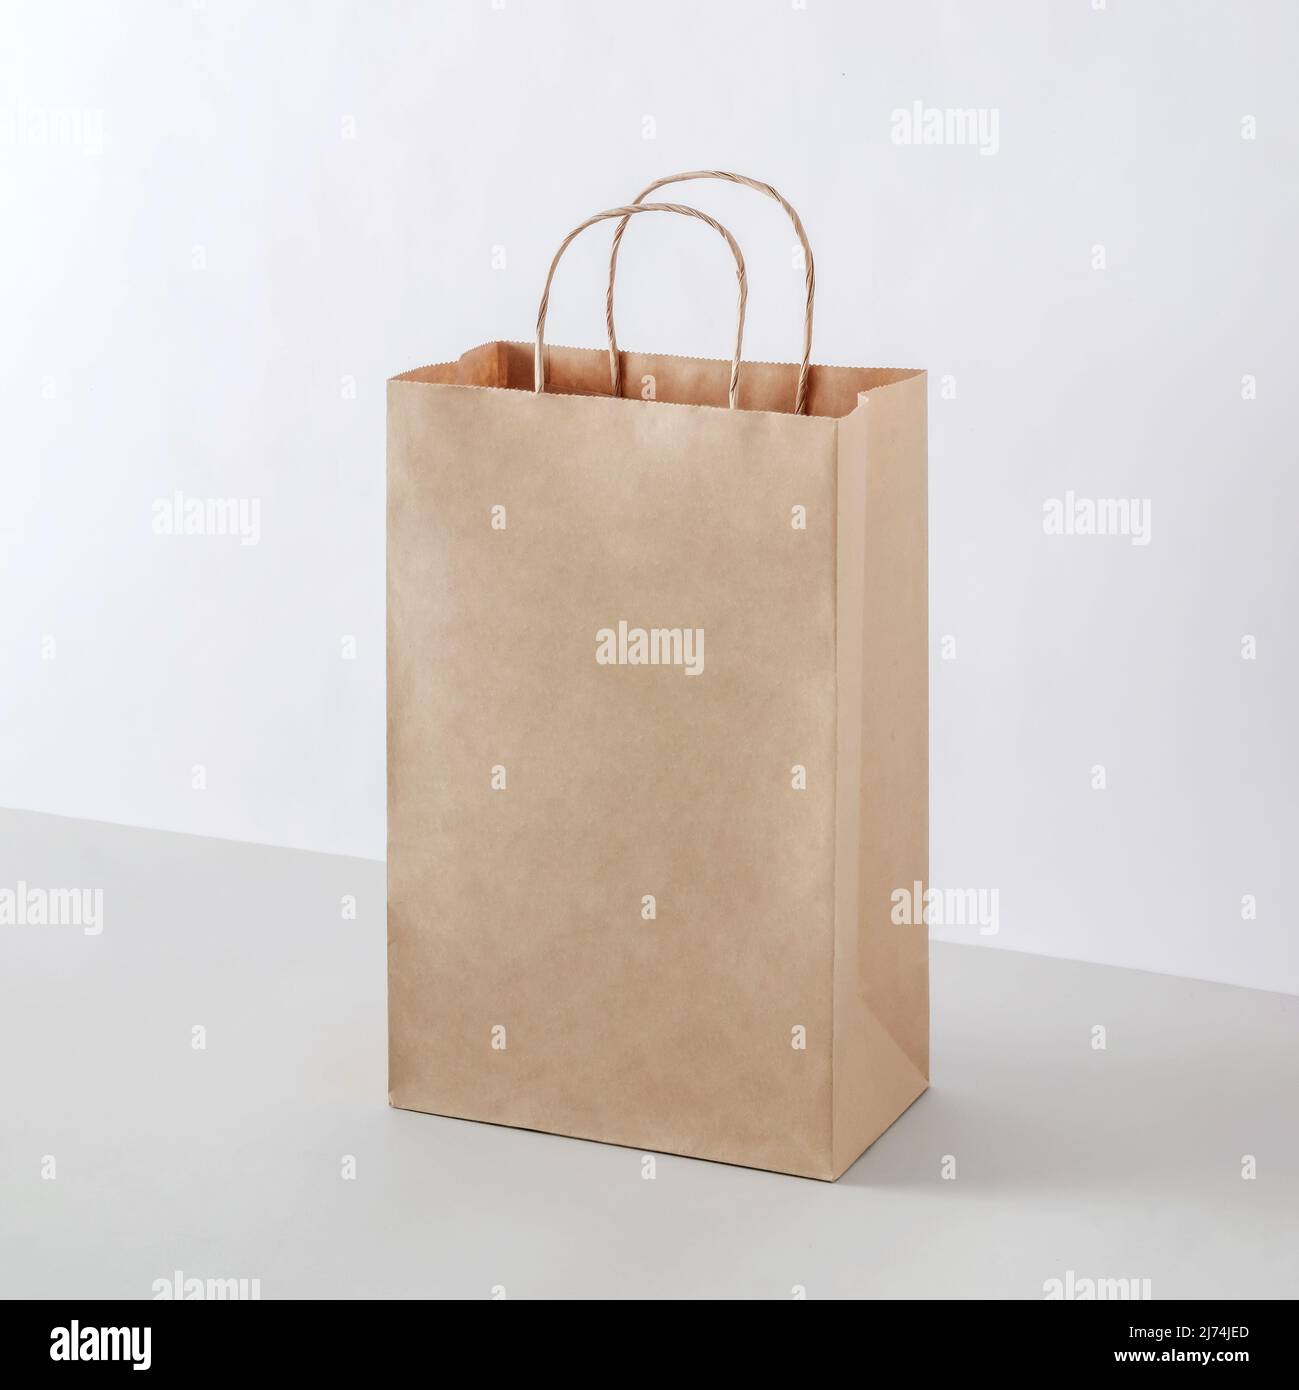 Cardboard package as a mockup for a business selling a purchase in a store. Paper for recycling and delivery. Stock Photo